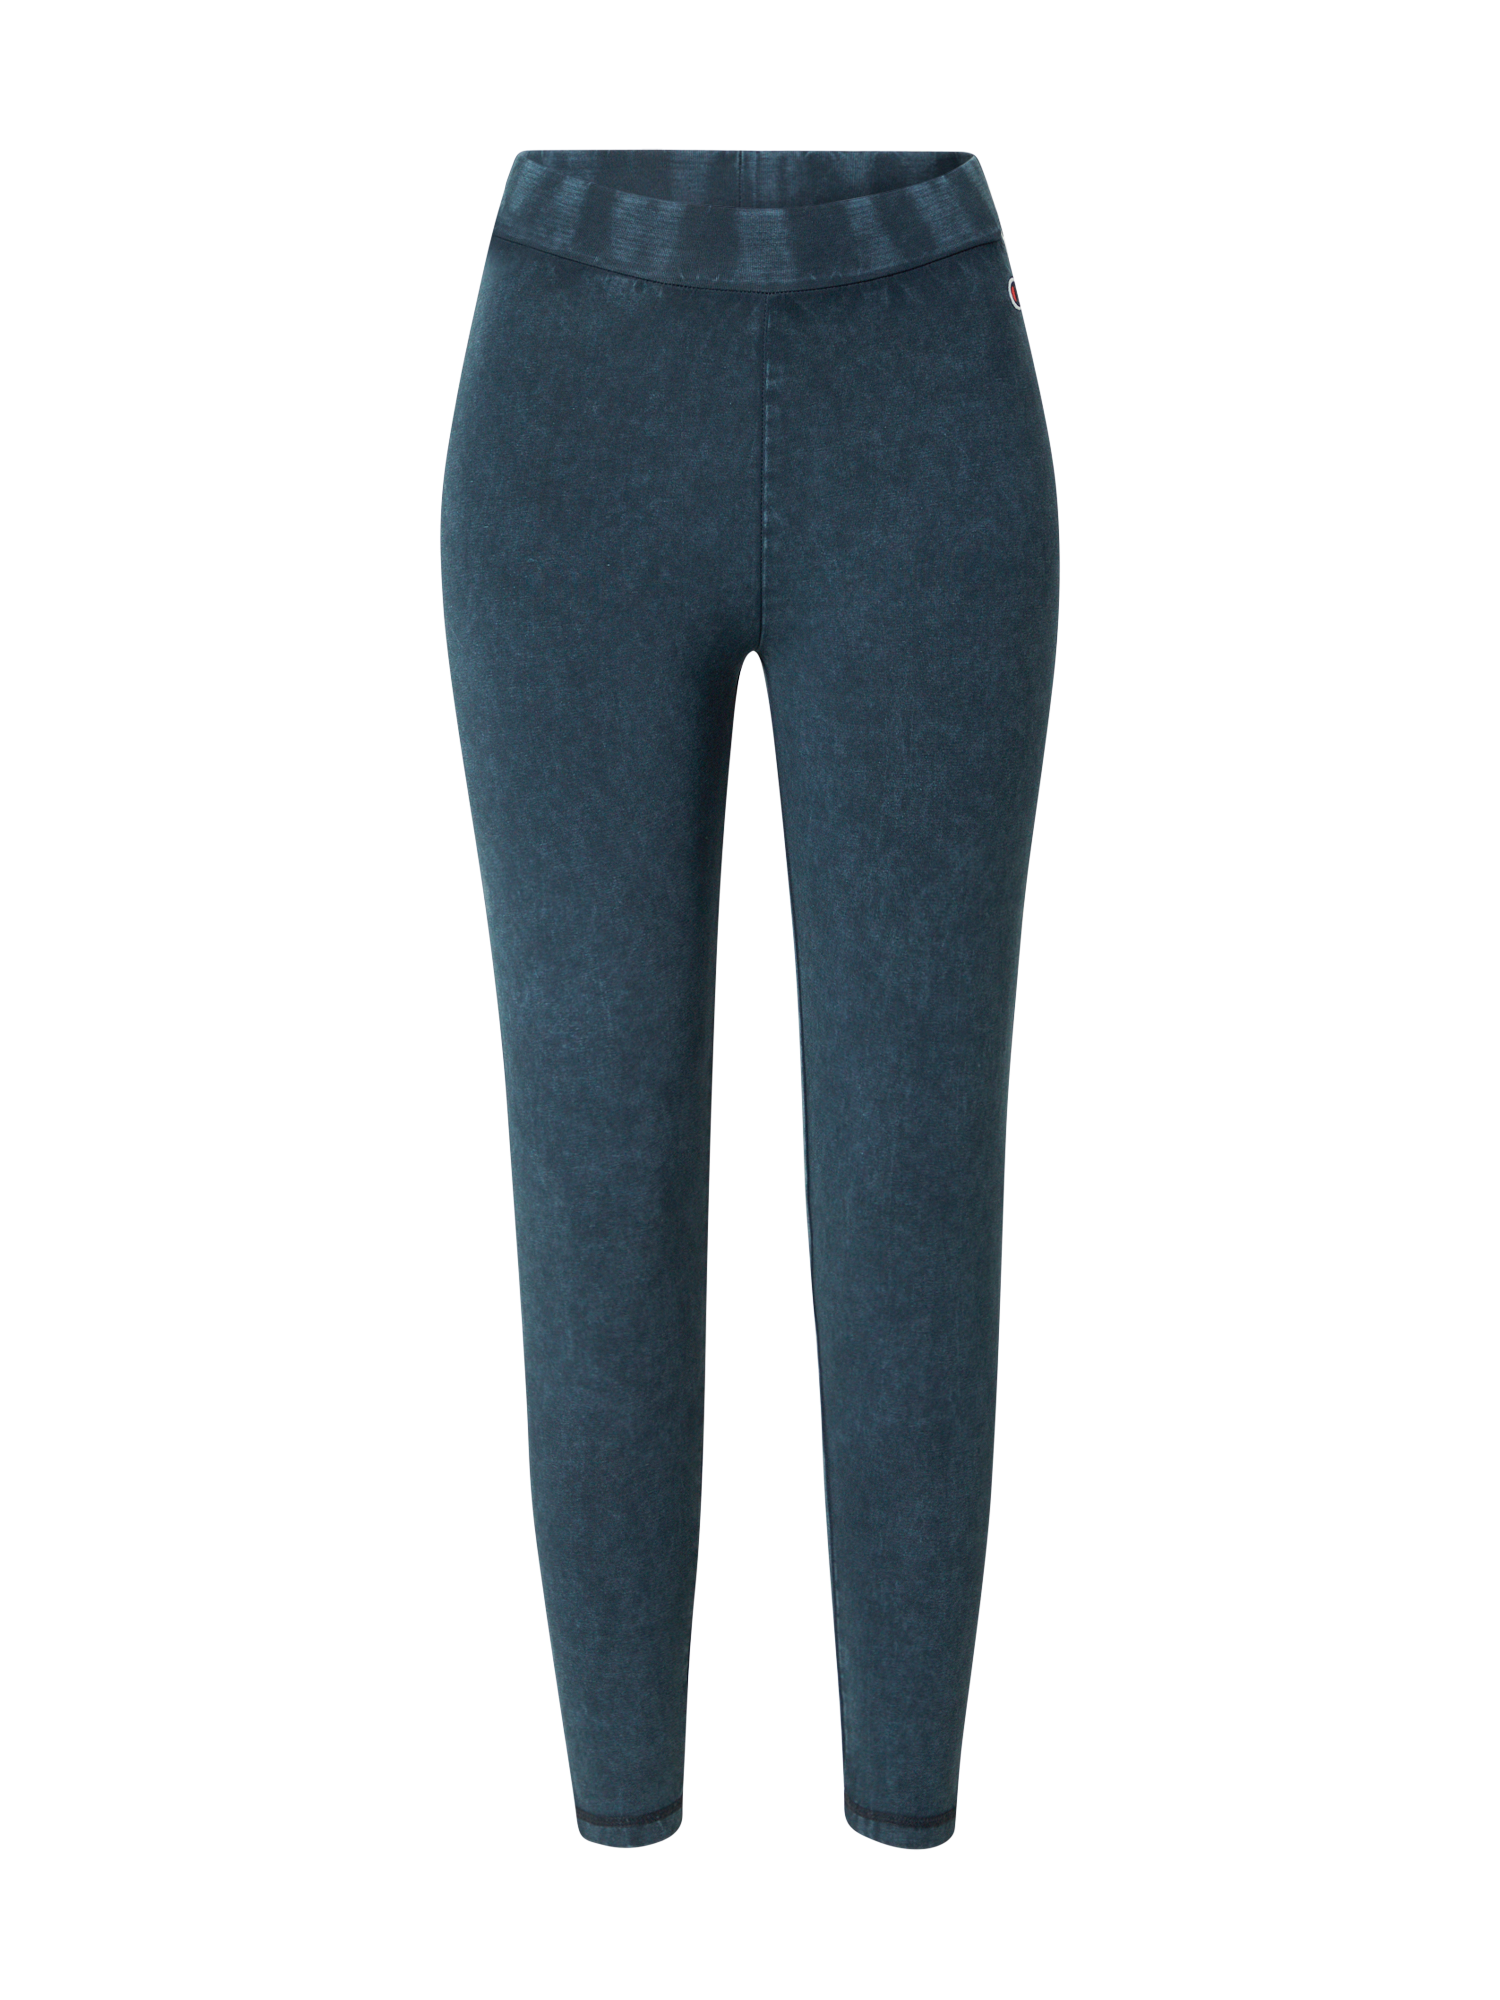 Champion Authentic Athletic Apparel Leggings in Blu Colomba 